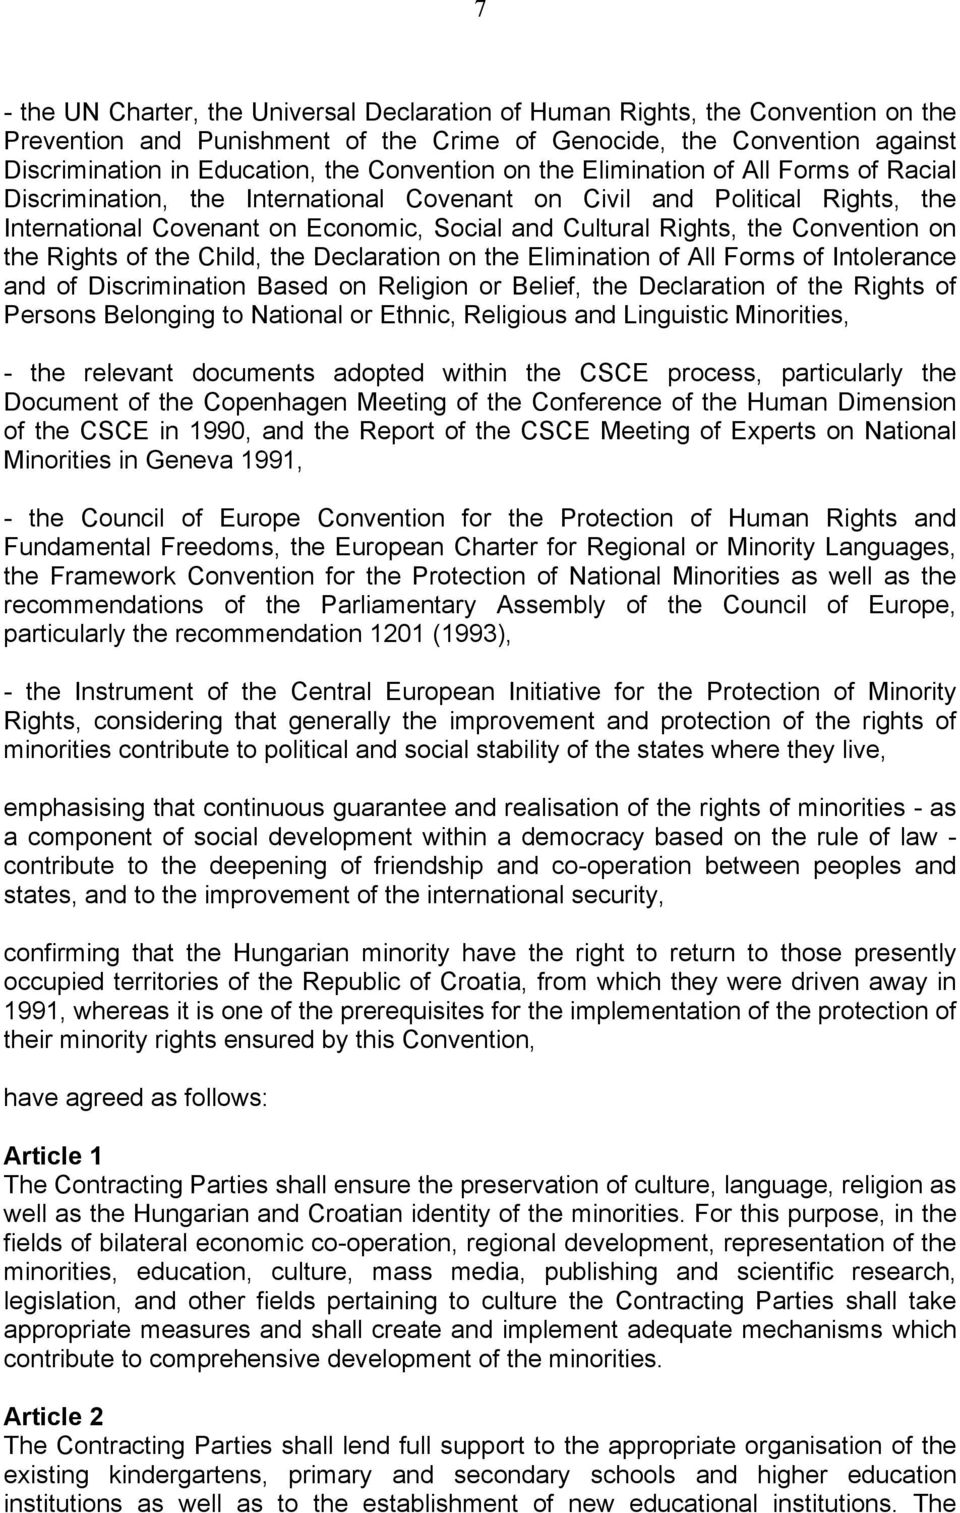 Convention on the Rights of the Child, the Declaration on the Elimination of All Forms of Intolerance and of Discrimination Based on Religion or Belief, the Declaration of the Rights of Persons